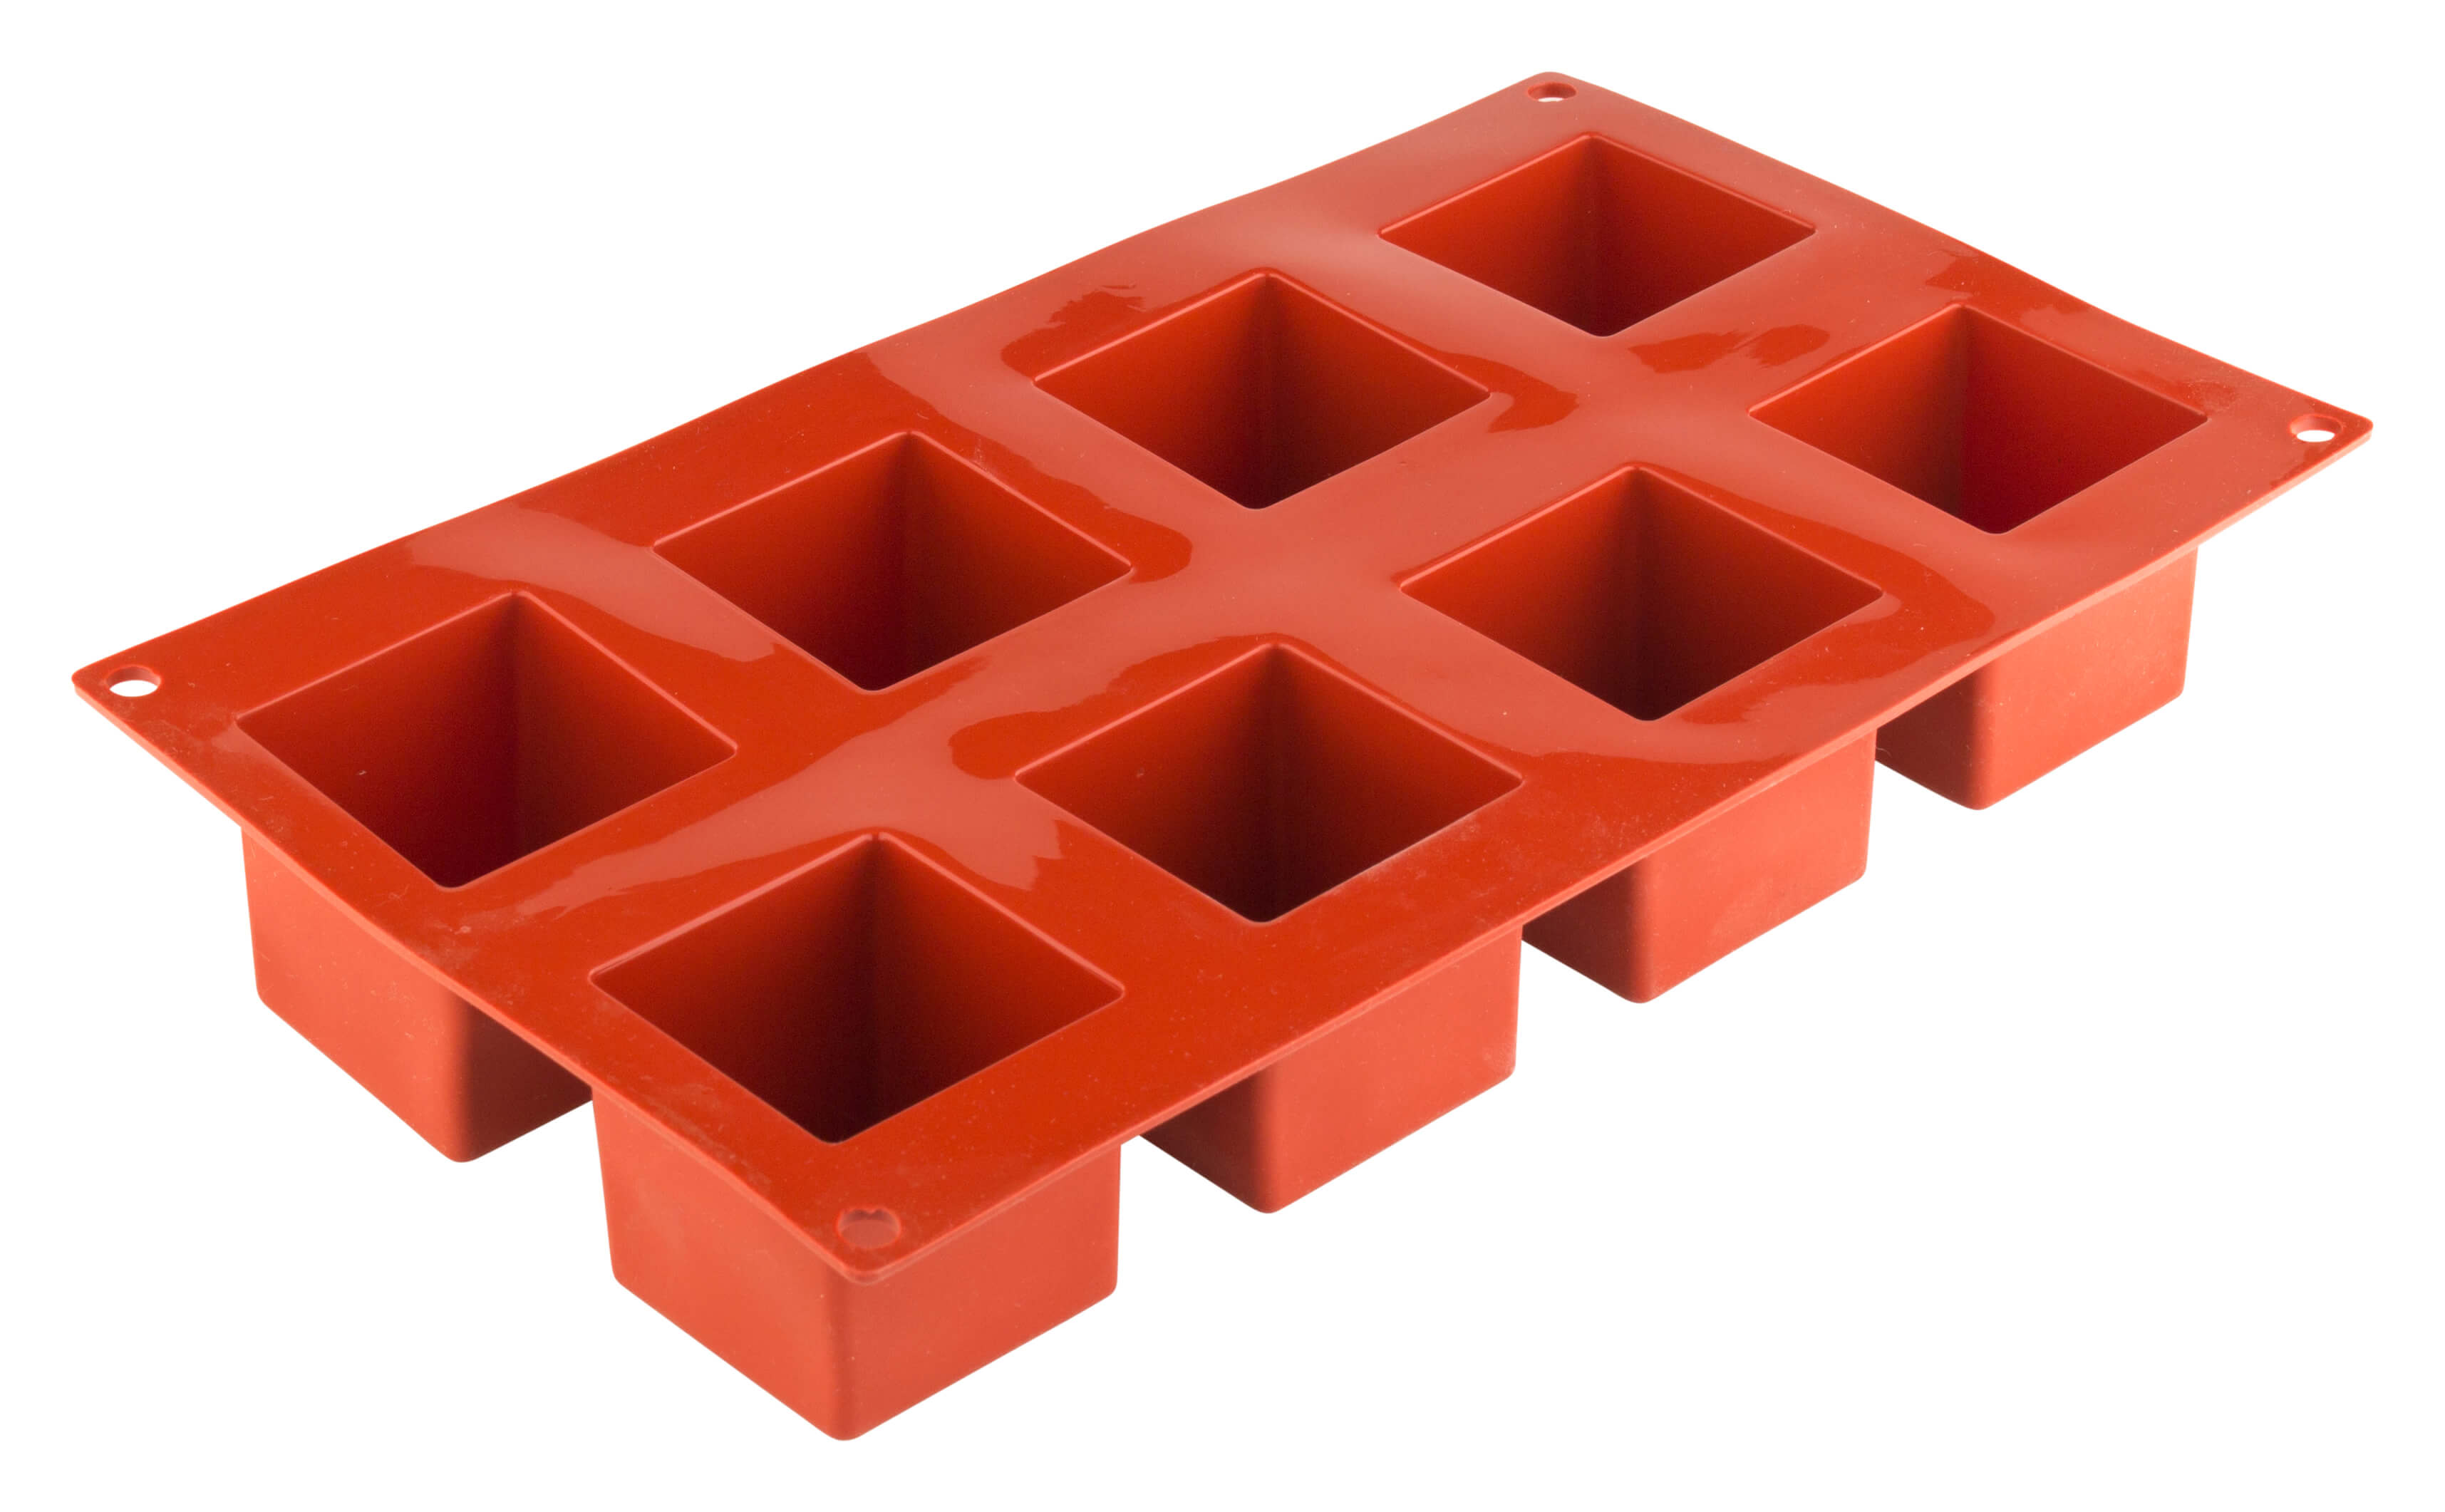 Ice tray, silicone, 8 cubes (5cm) - red